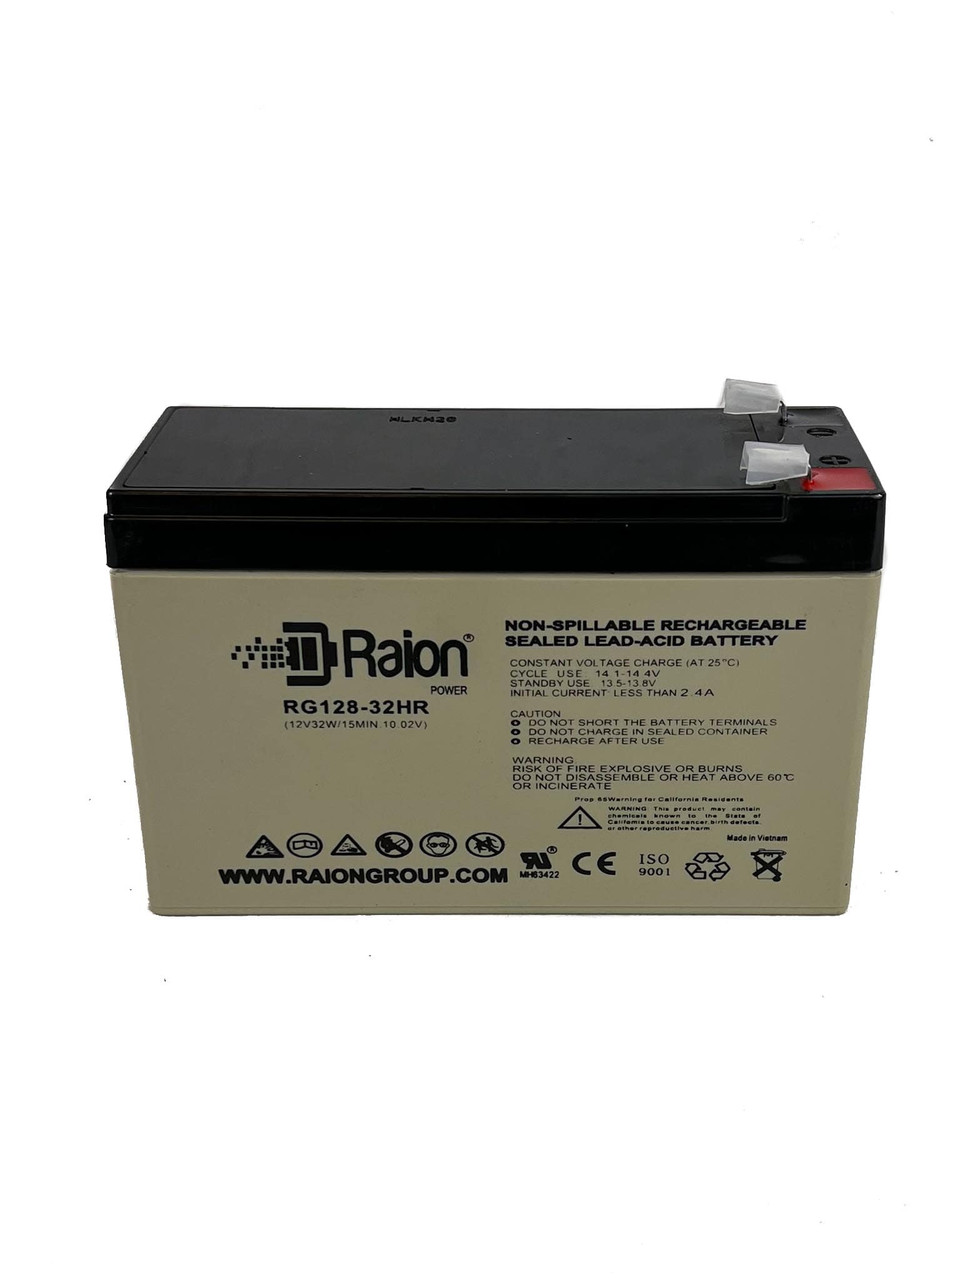 Raion Power RG128-32HR Replacement High Rate Battery Cartridge for Belkin F6C500